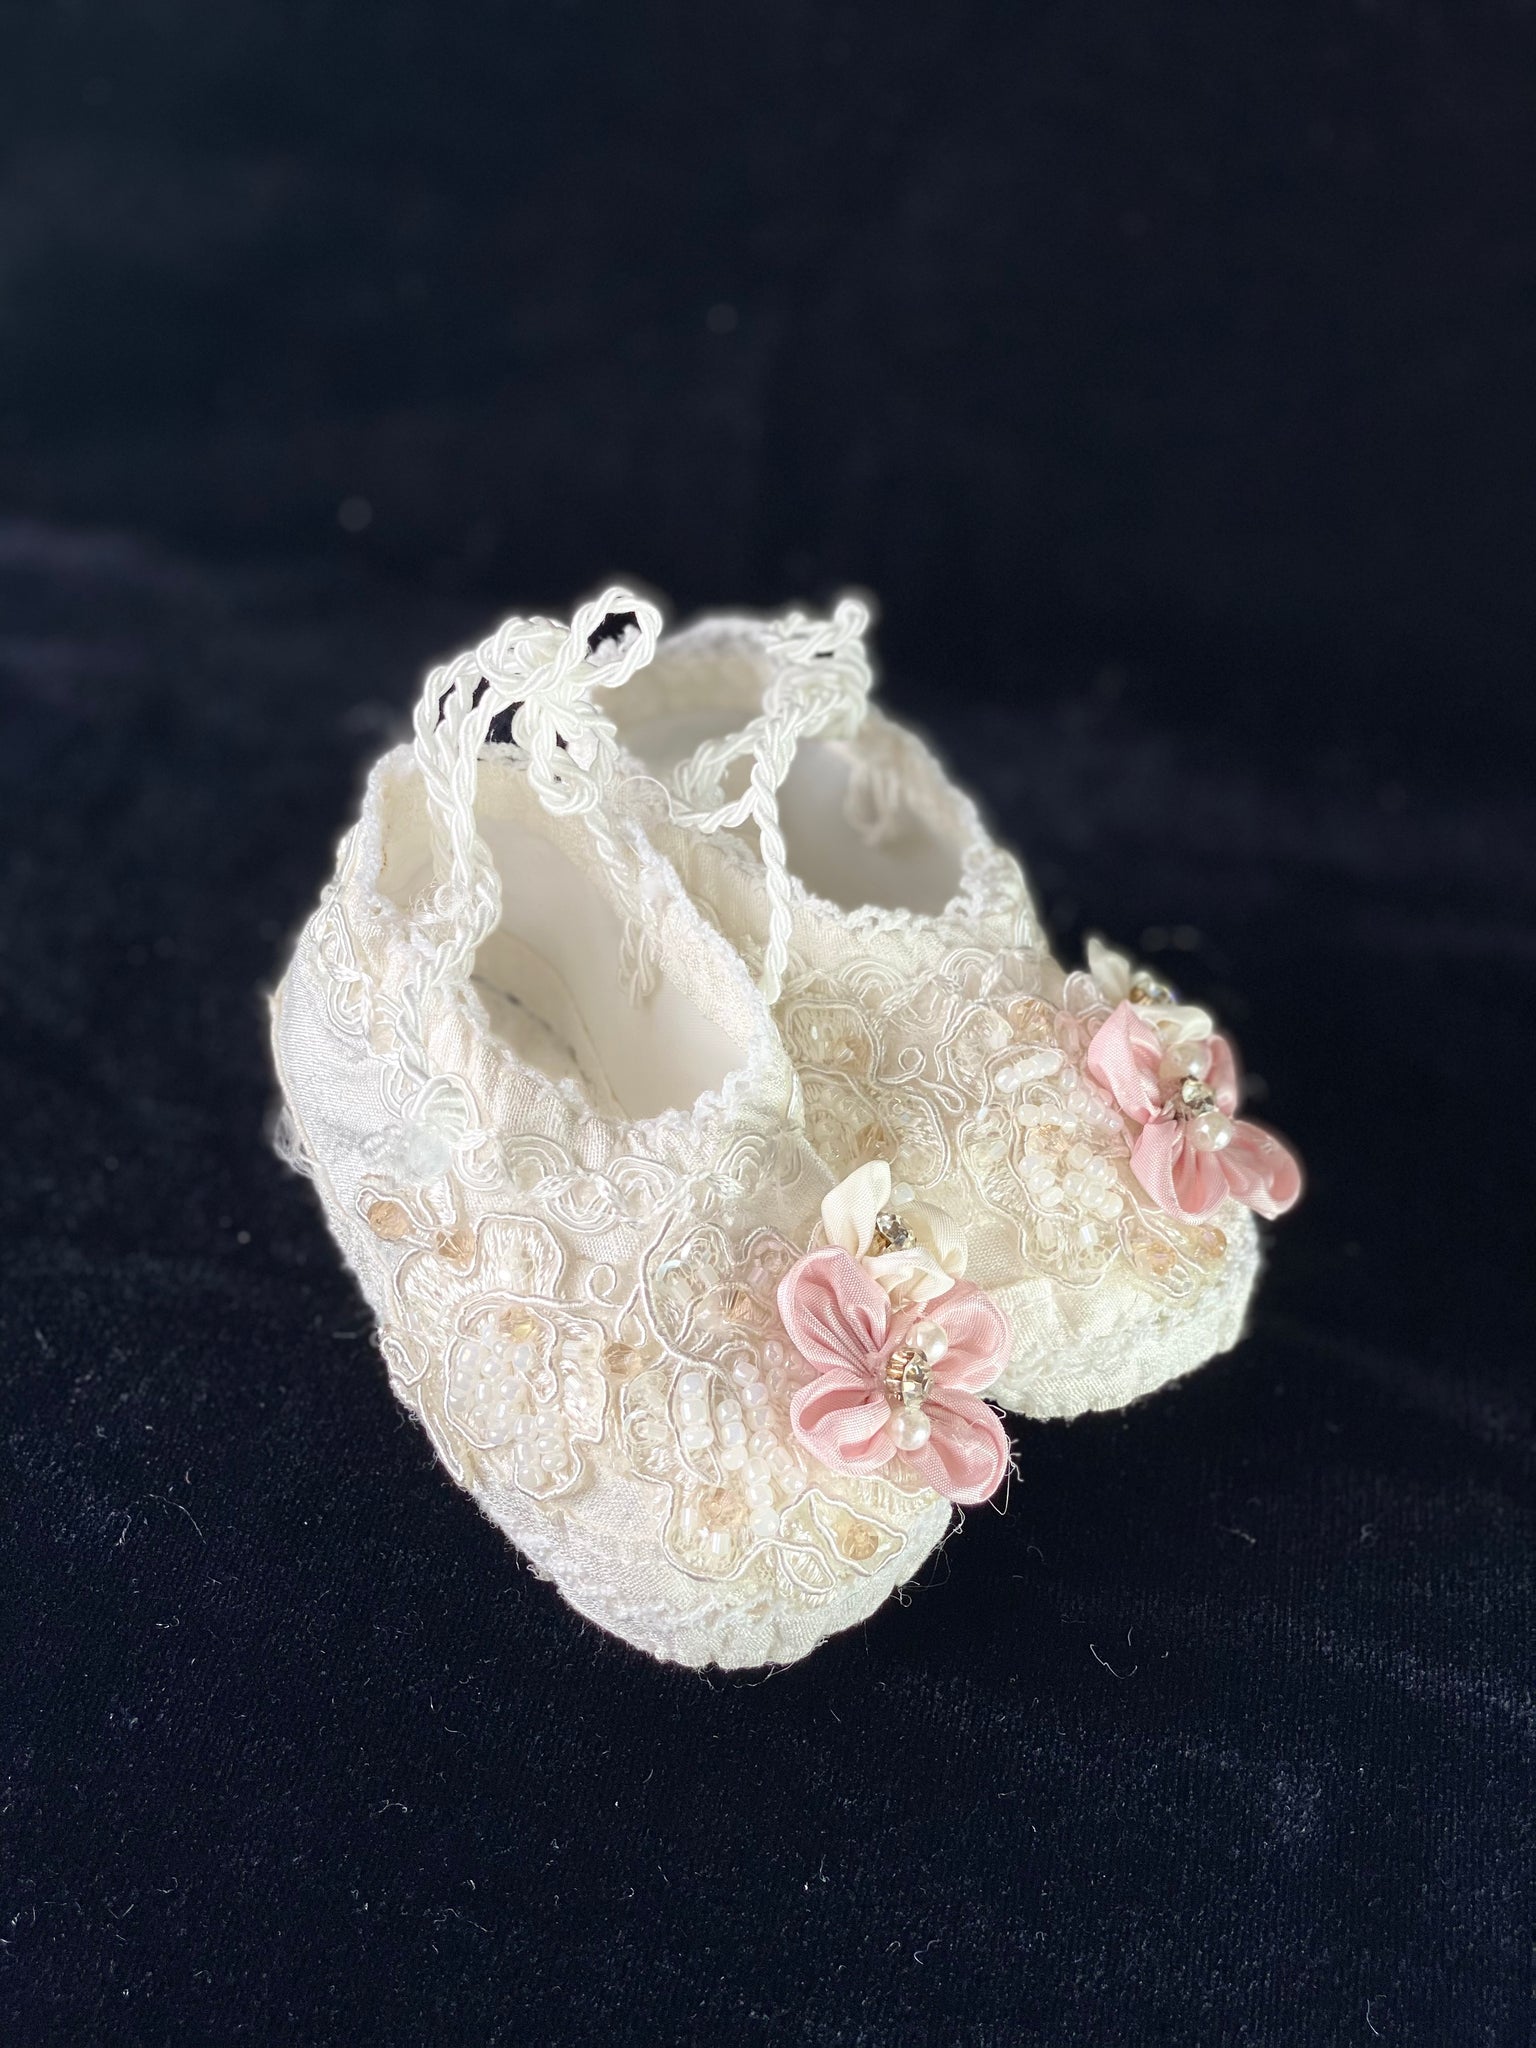 Elegant handmade ivory / white baby girl shoes with embroidery, lace, flowers, bows, and jewels (pearls and crystals).